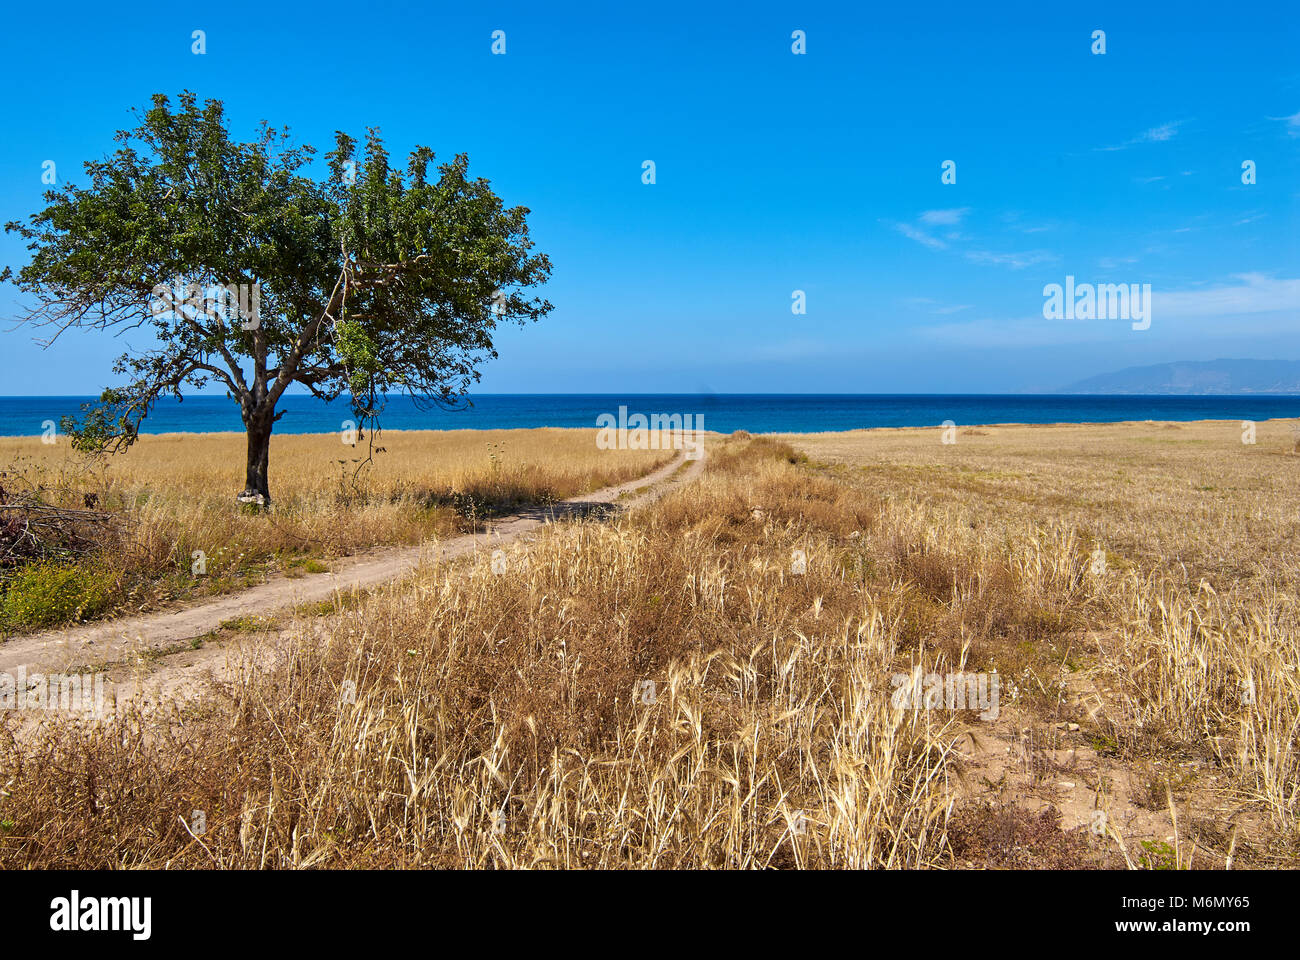 Lonely olive tree on a beveled field by the sea with a blue cloudy sky, Limassol, Cyprus. Stock Photo